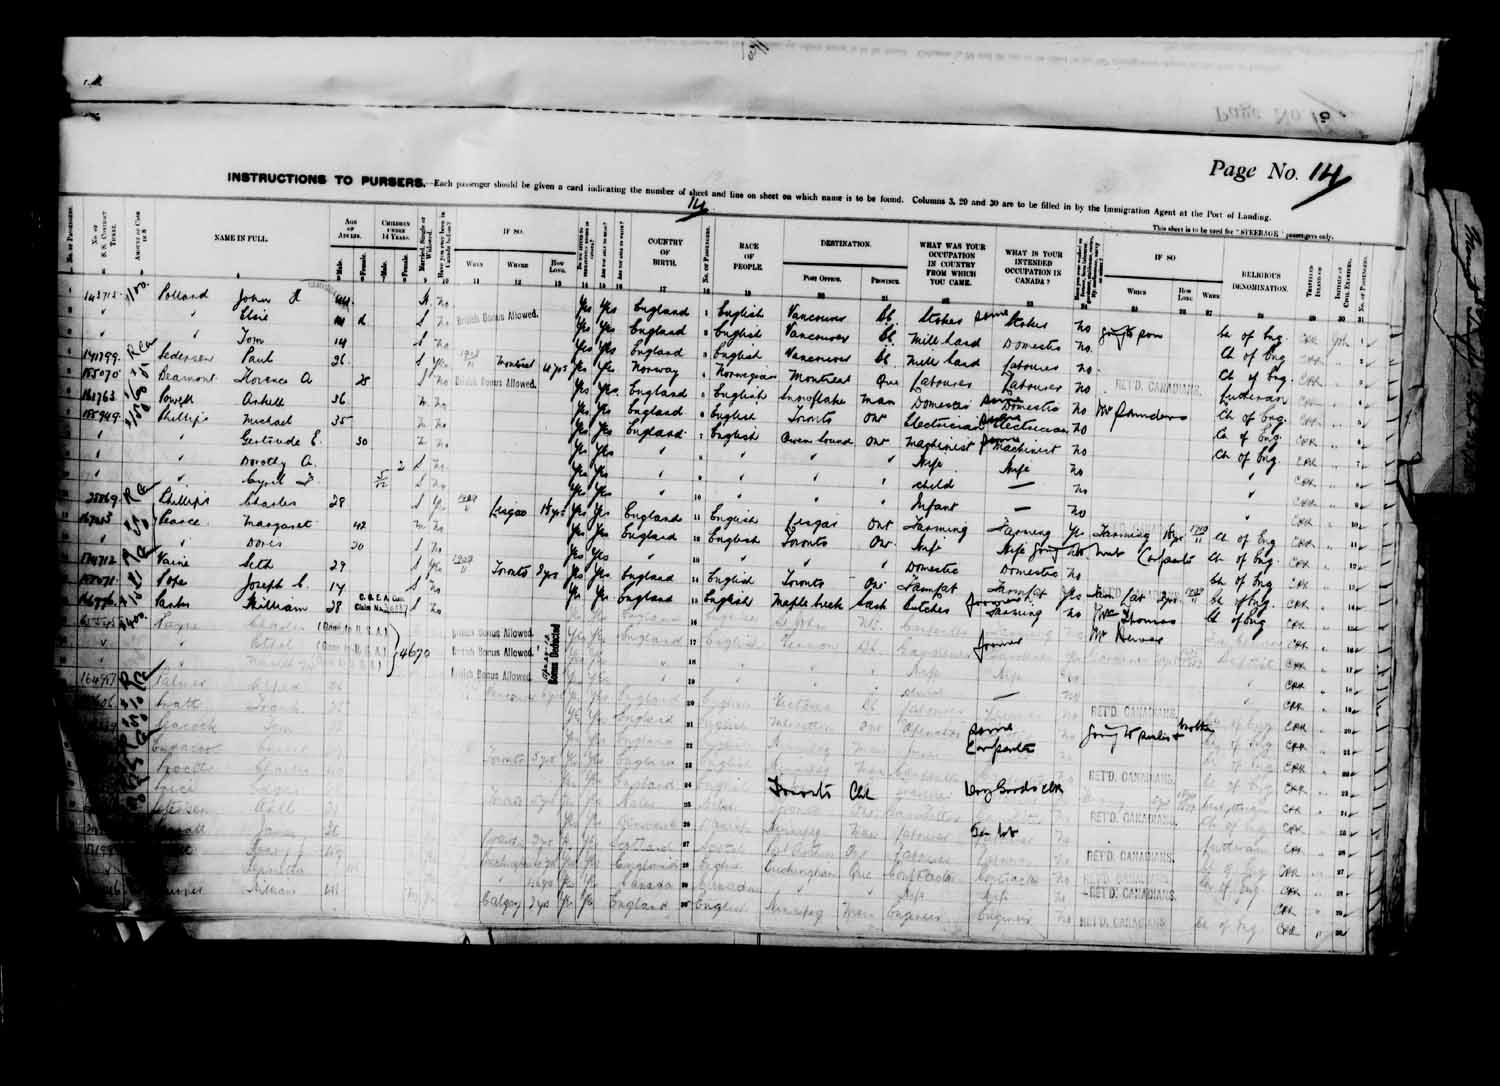 Digitized page of Passenger Lists for Image No.: e003627203